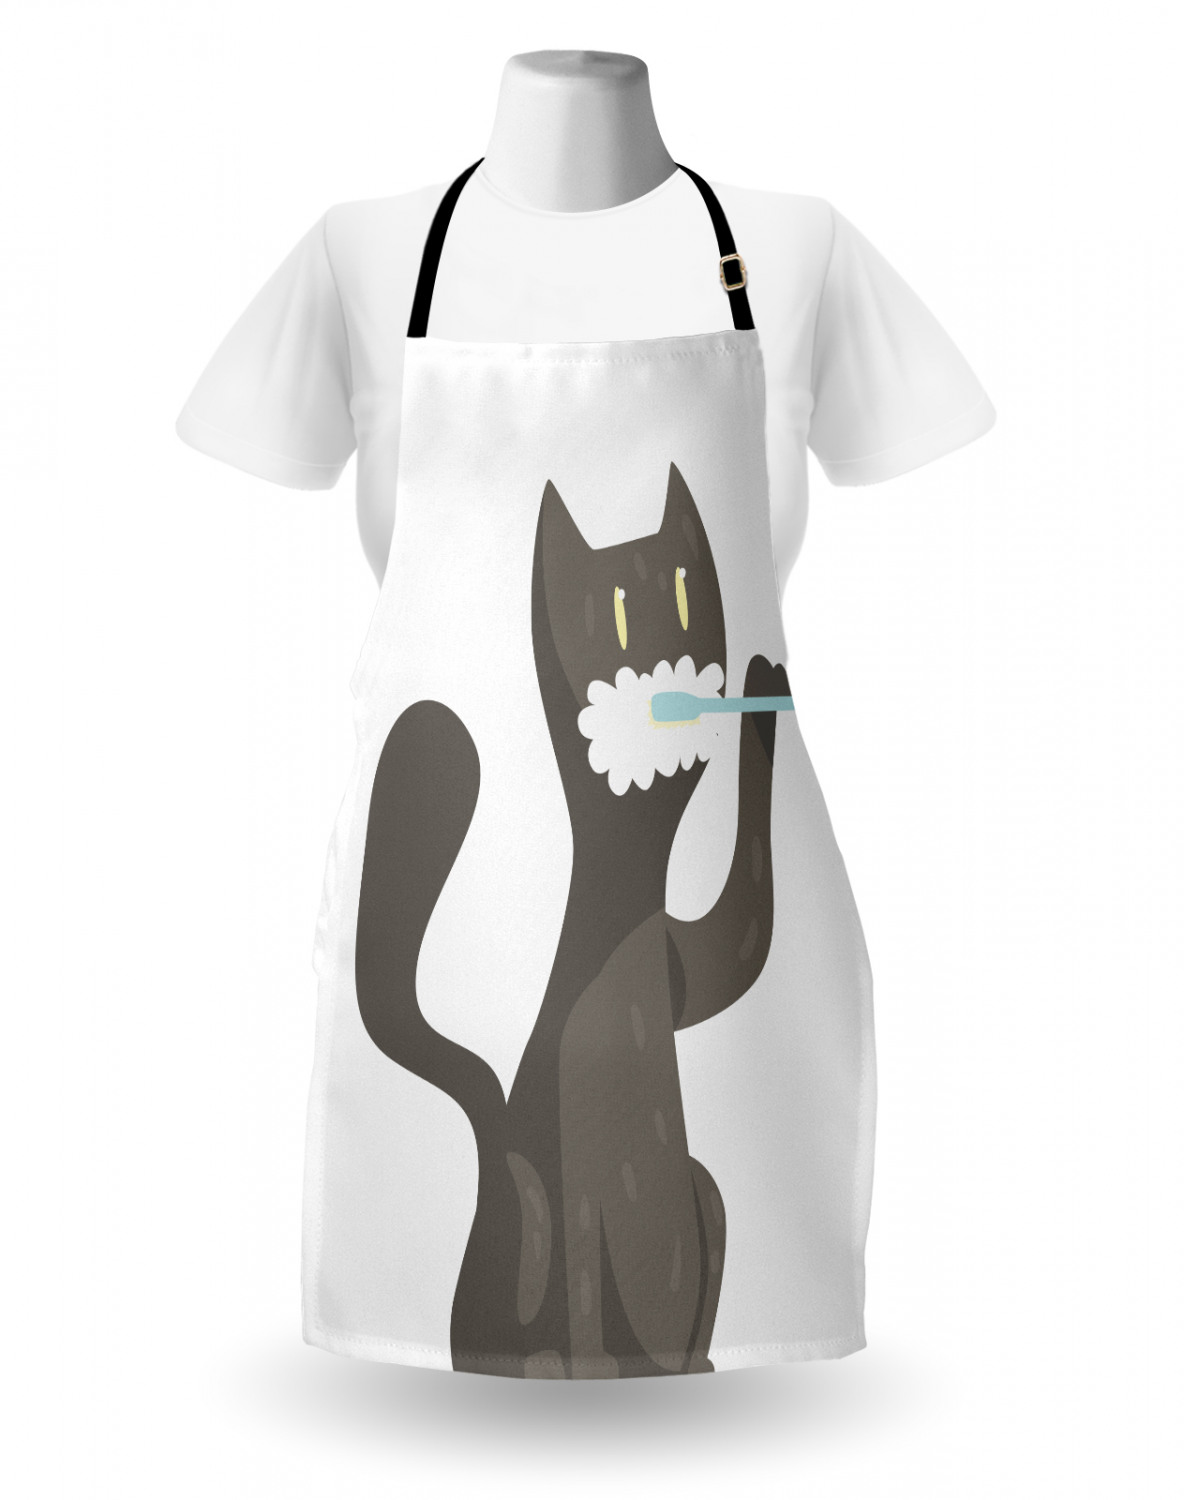 Details about  / Ambesonne Apron Bib with Adjustable Neck for Gardening Cooking Clear Image